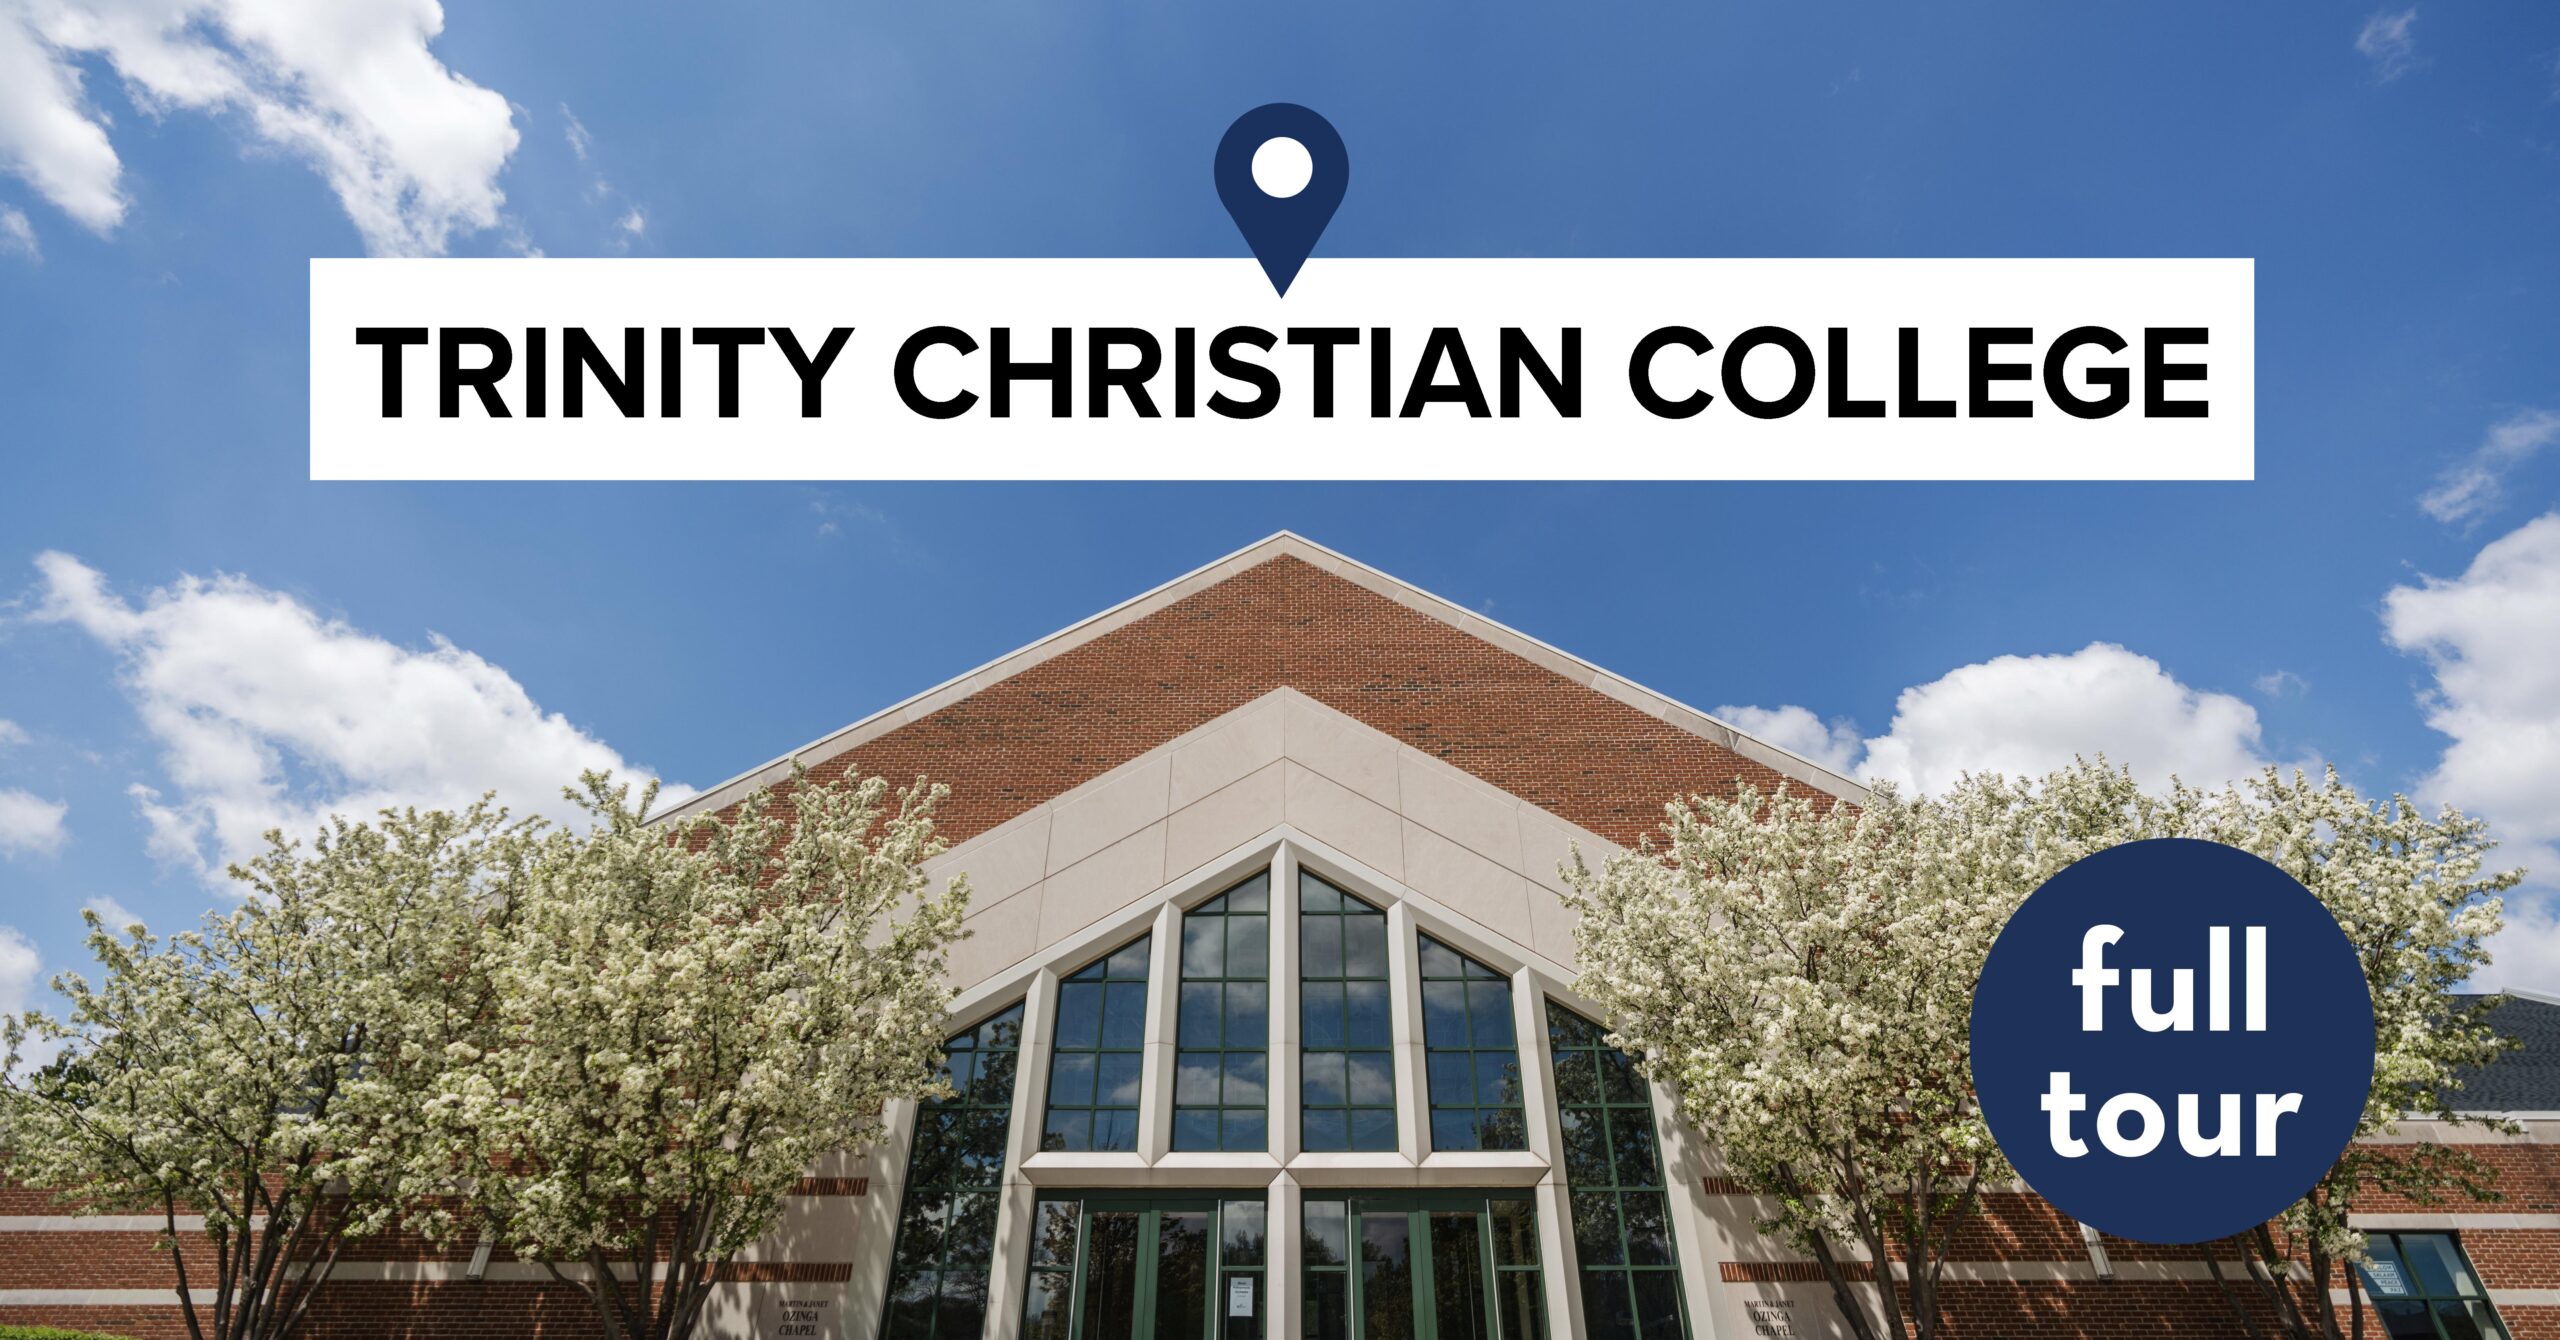 Trinity Christian College recently added a full campus tour to its channel on YouTube. This in-depth overview of Trinity’s beautiful campus, nestled in a quaint neighborhood, showcases the diverse spaces catering to various aspects of student life and learning.